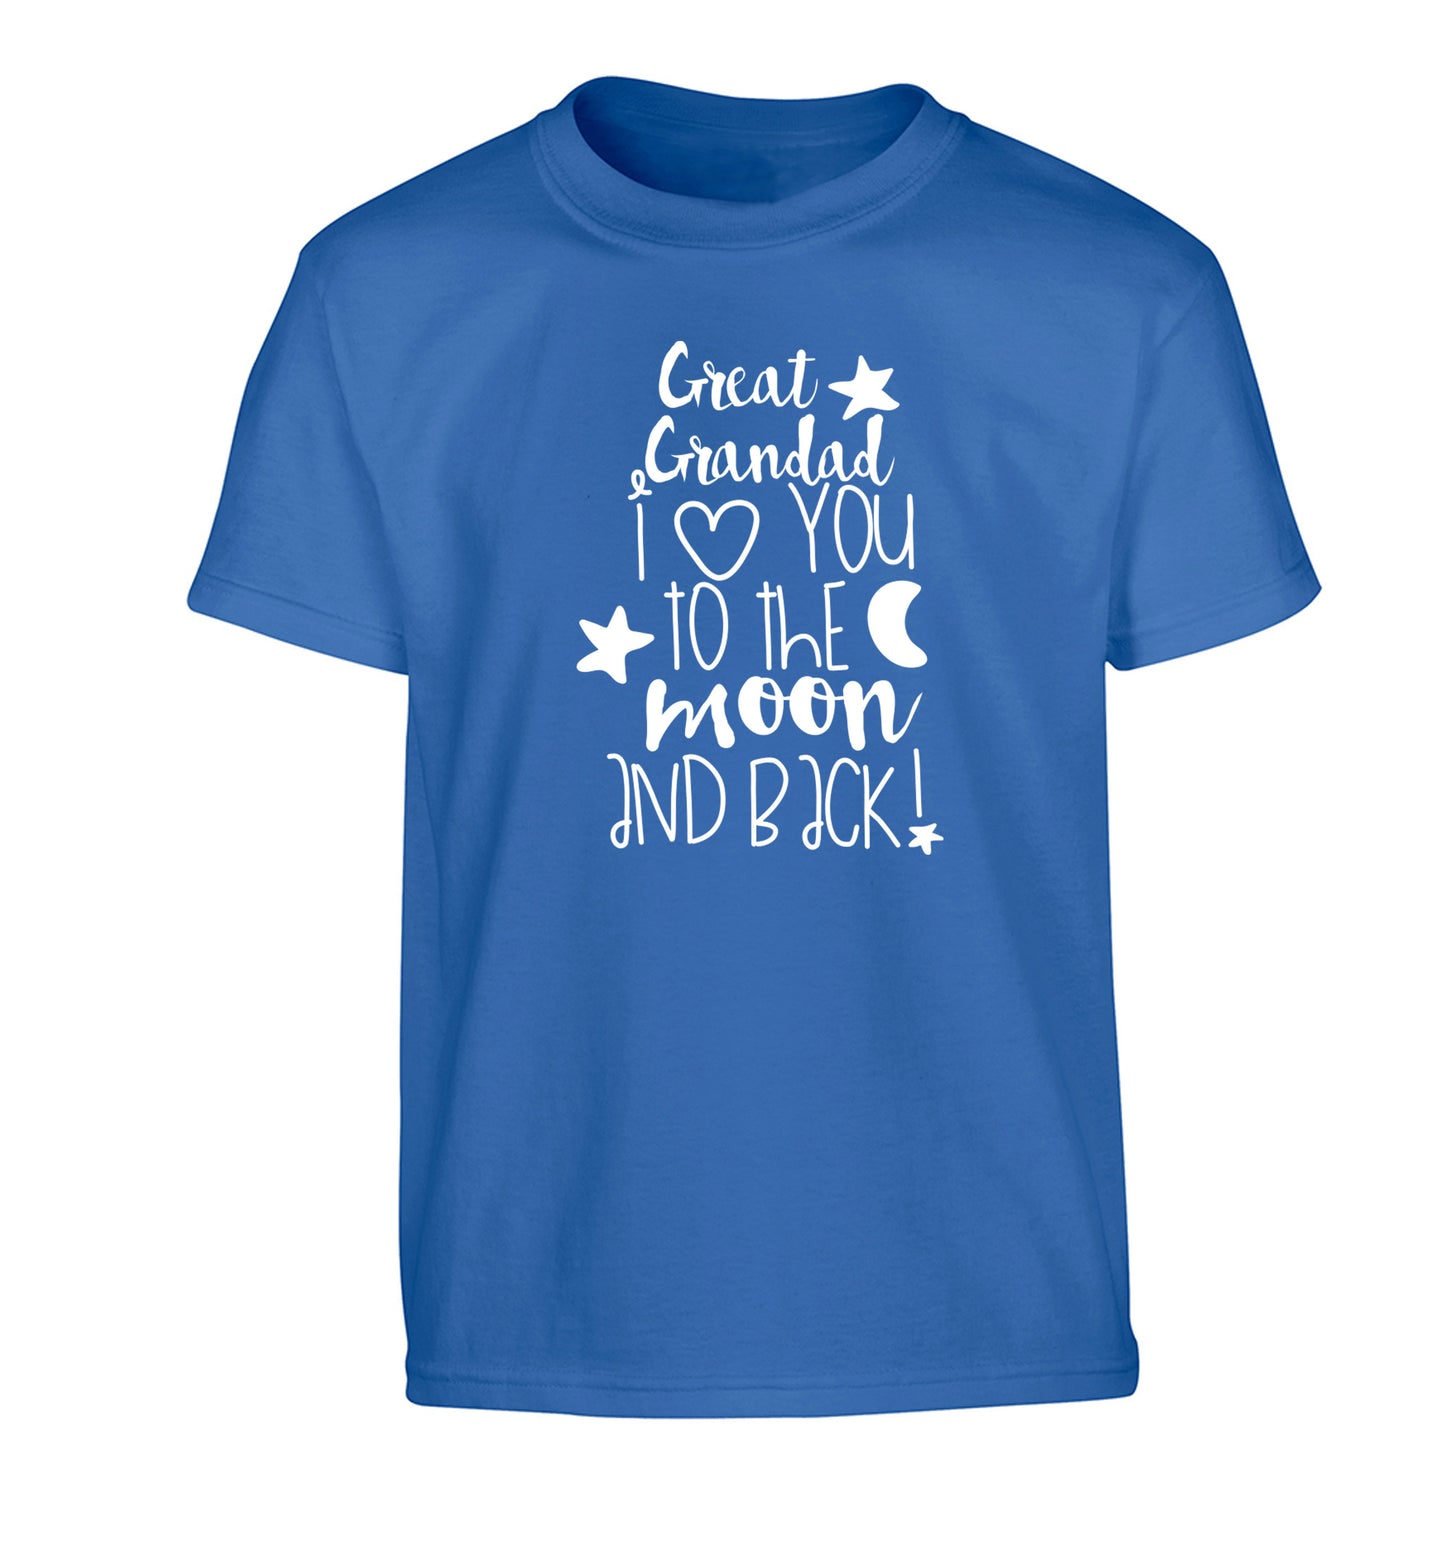 Great Grandad I love you to the moon and back Children's blue Tshirt 12-14 Years